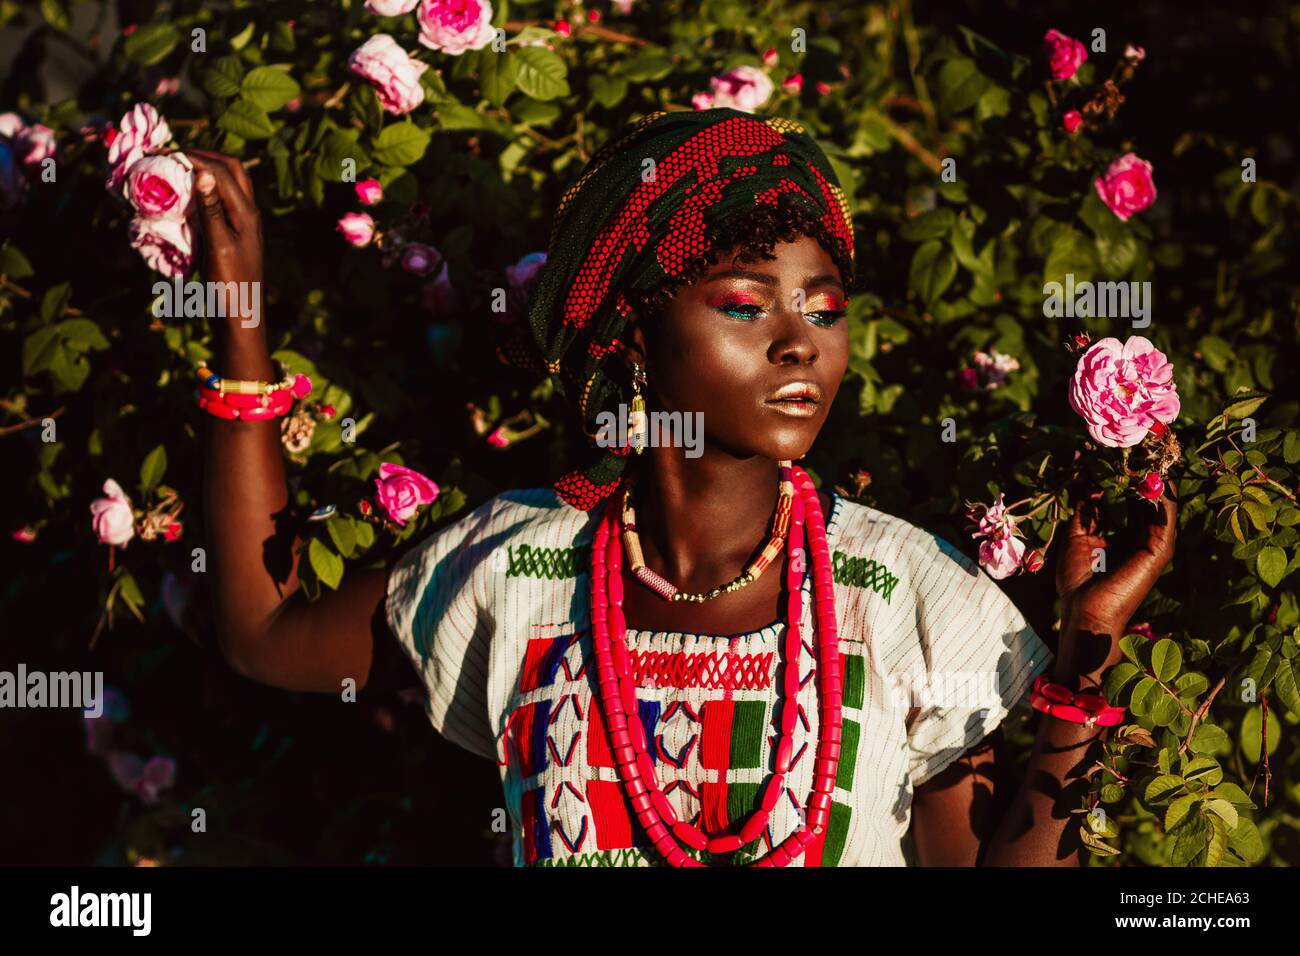 cropped image of african female fashion model in national costume, jewellry, turban and make up posing in garden of roses, bright daylight sun. Stock Photo